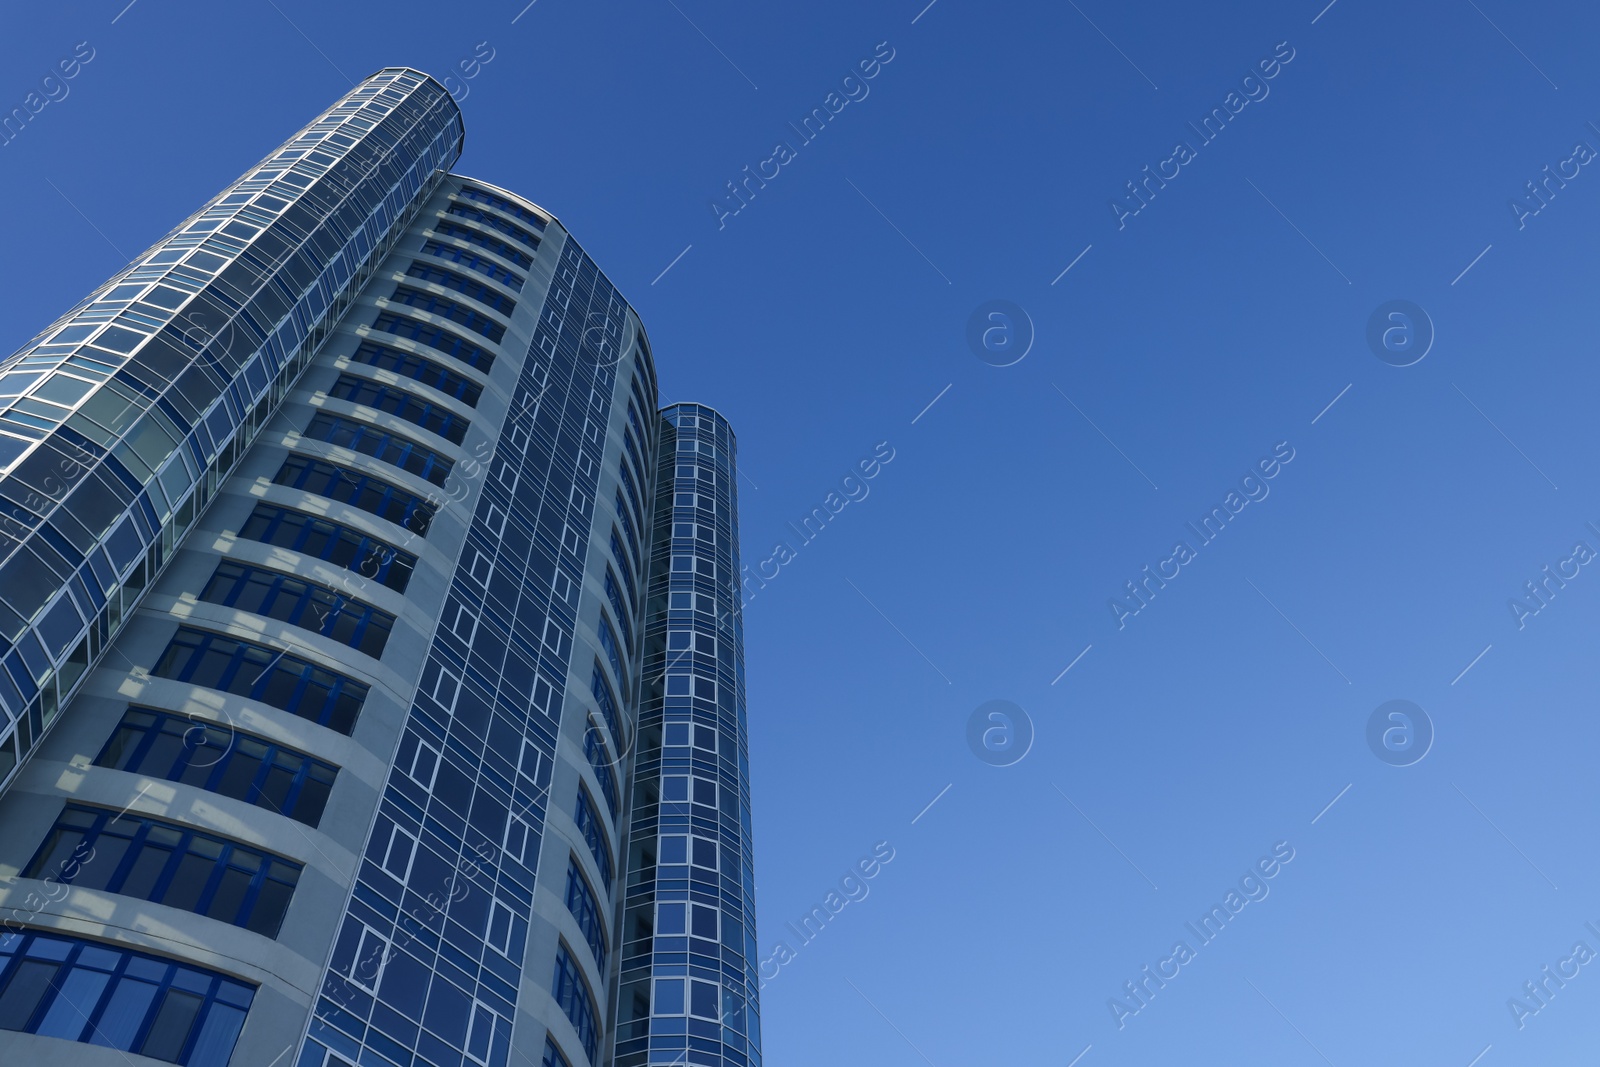 Photo of Beautiful skyscraper against blue sky on sunny day, low angle view